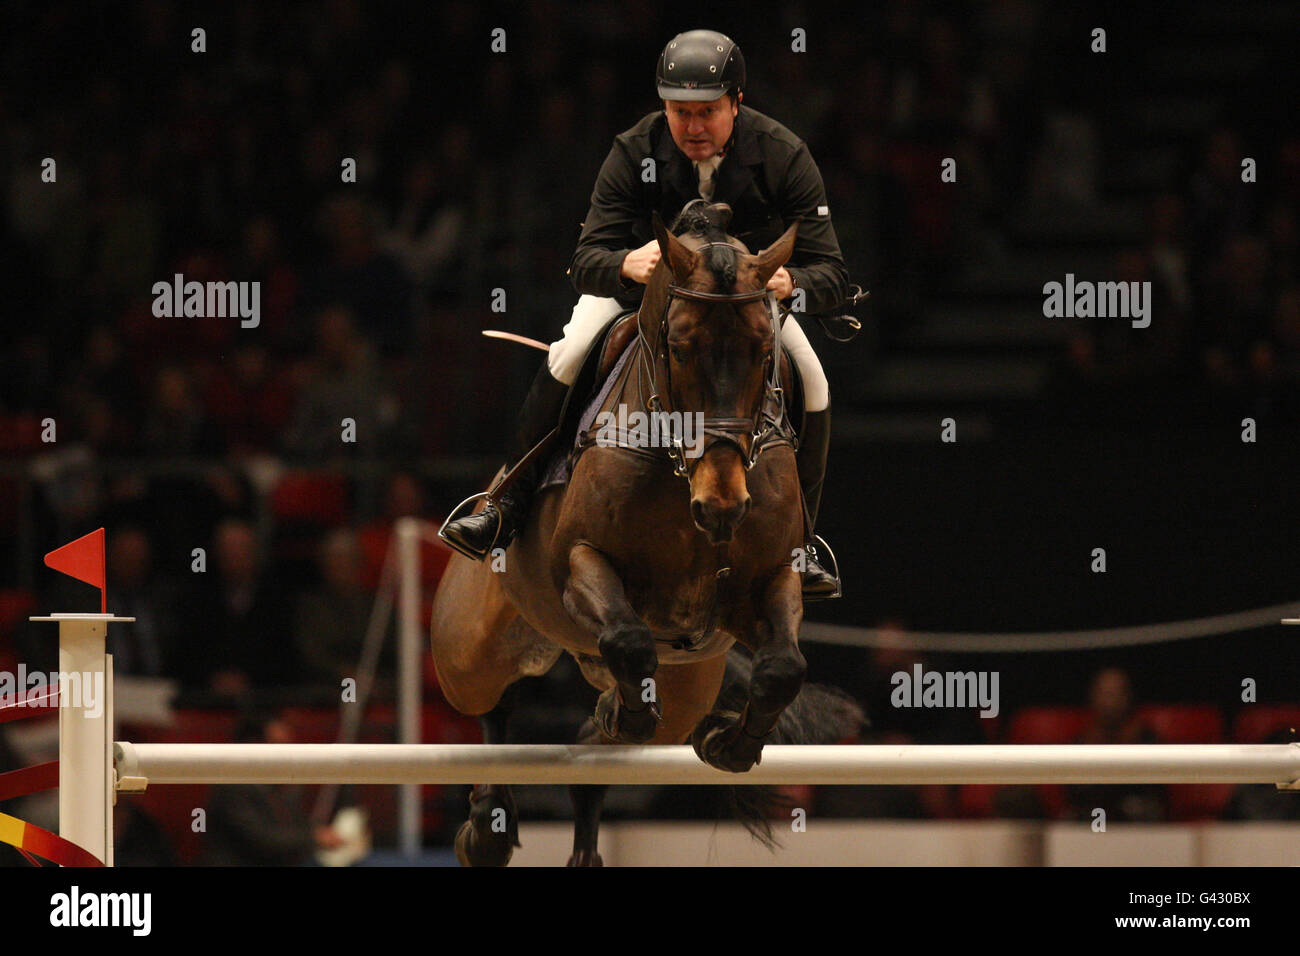 Great Britain's Robert Smith riding Raging Bull Vangelis S during the London International Horse Show at the Olympia Exhibition Centre, London. Stock Photo